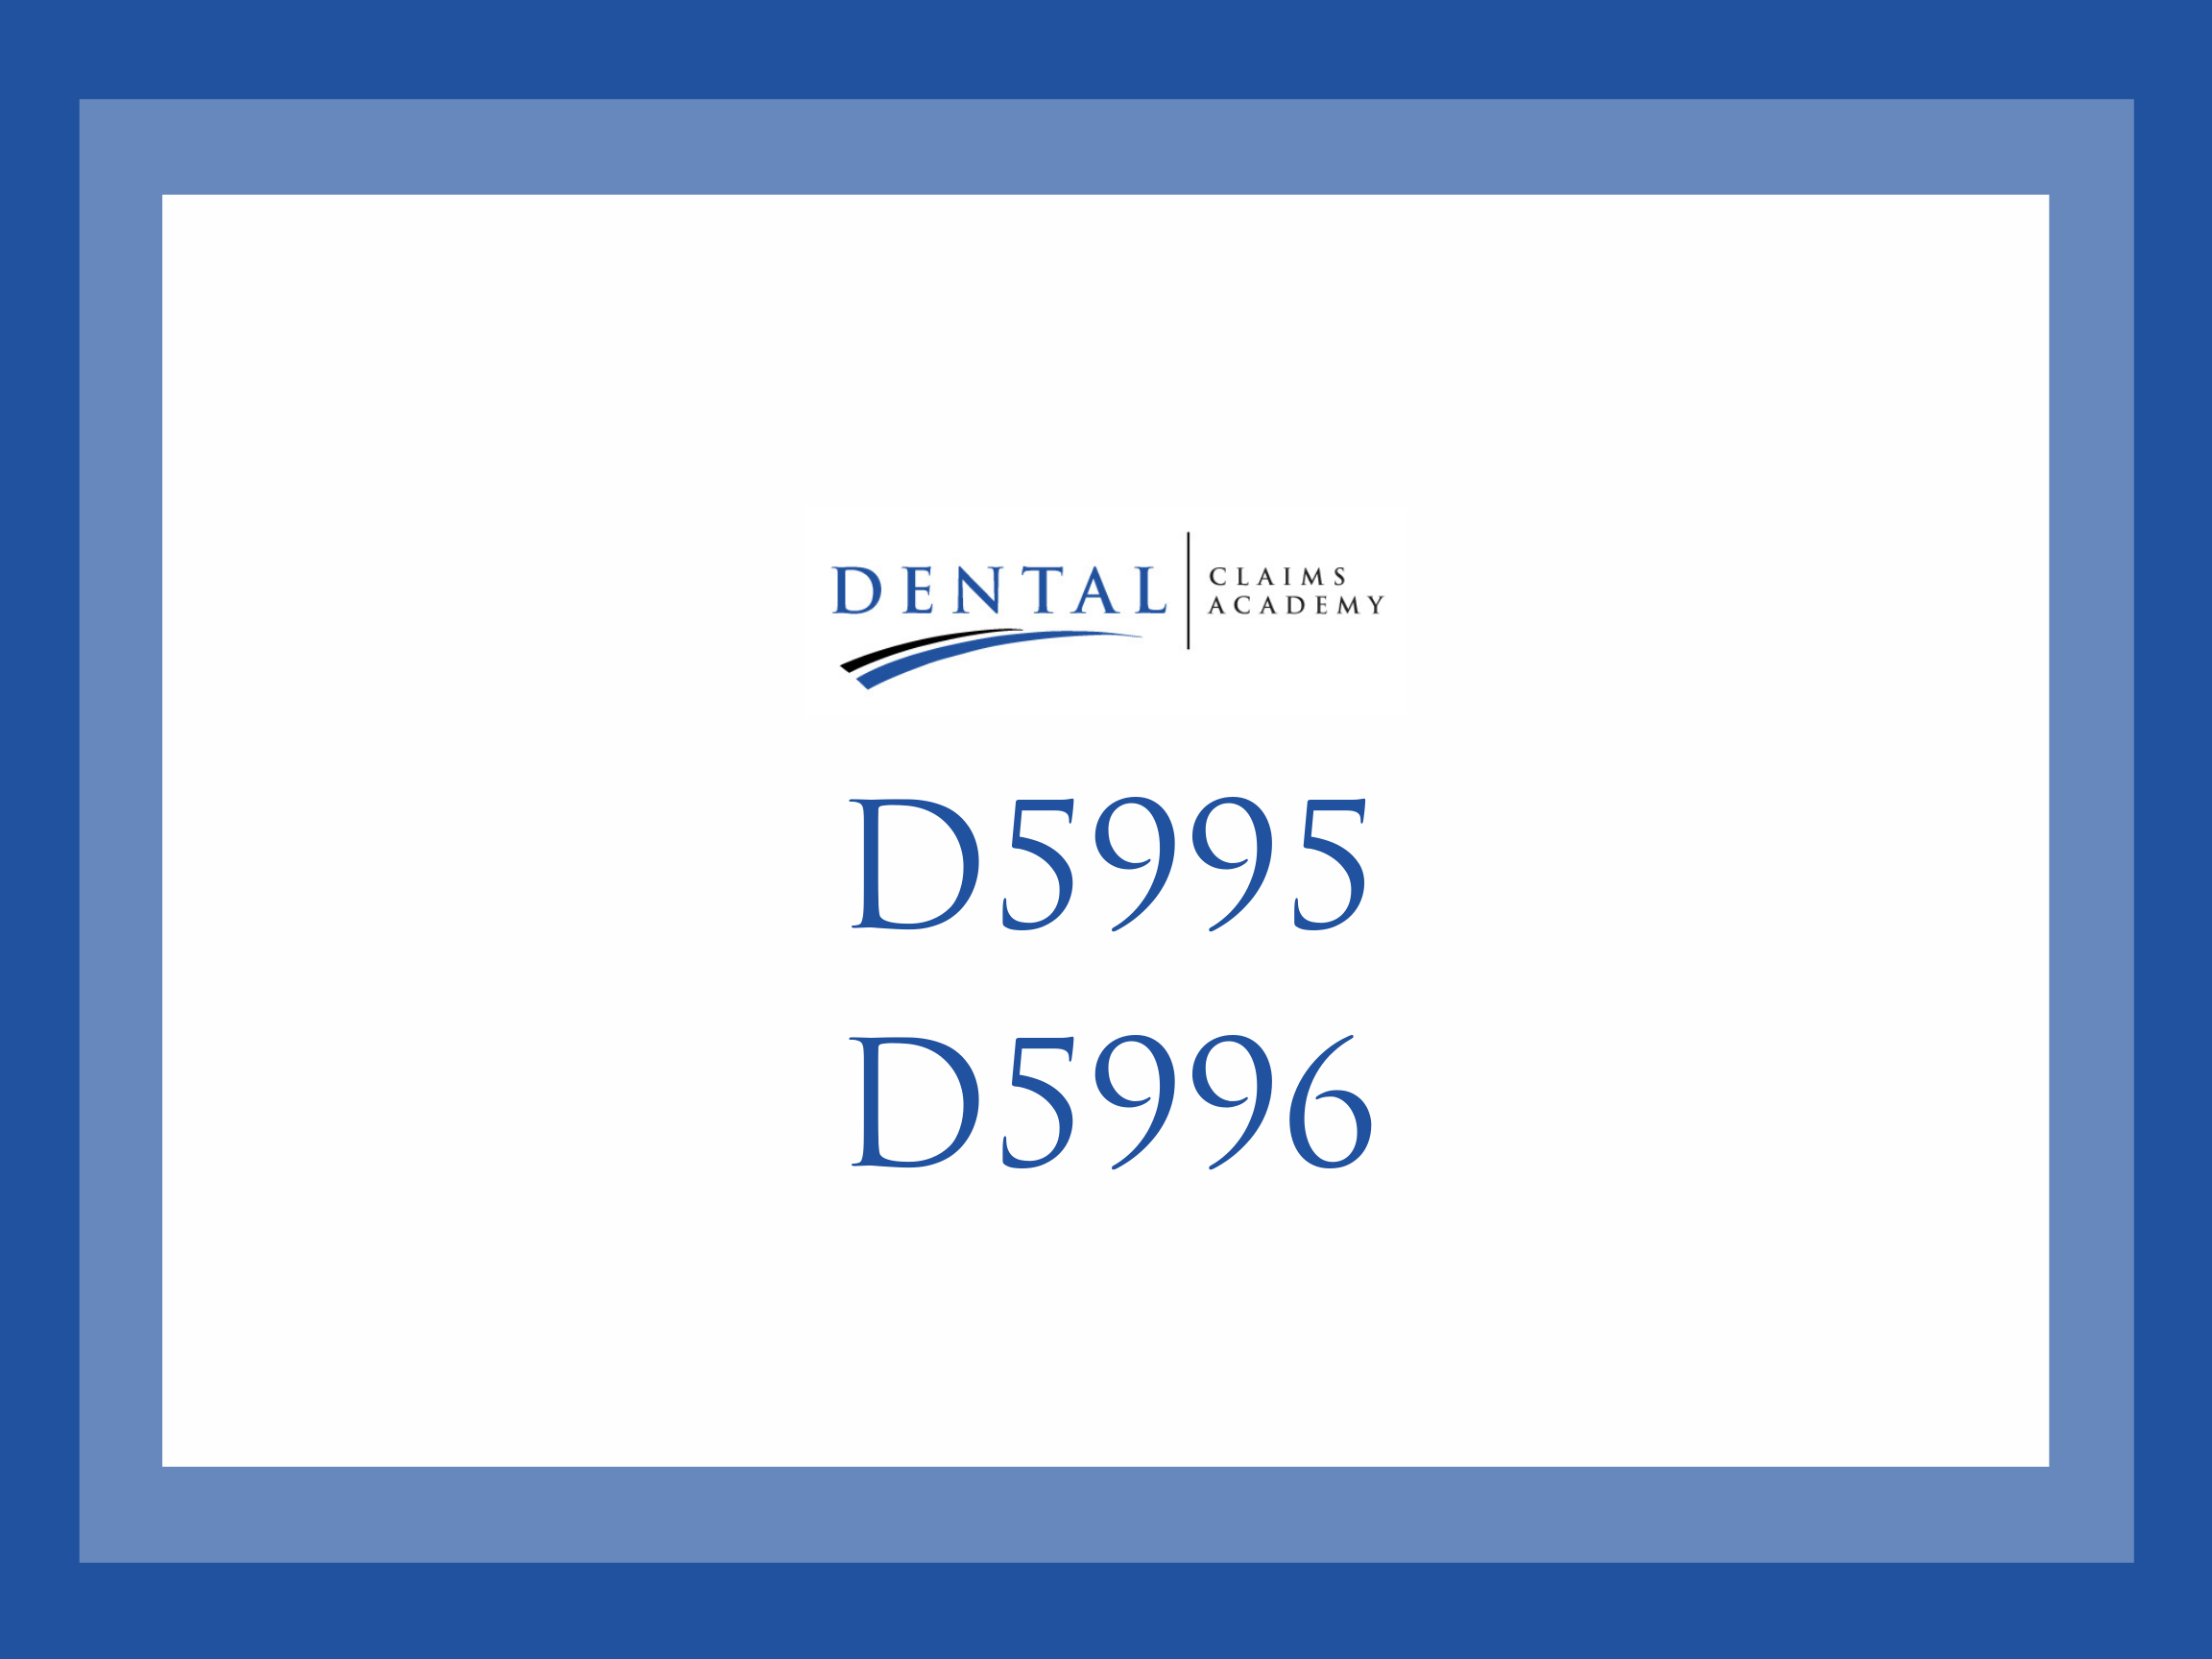 D5995 + D5996: Two new dental codes for CDT 2021